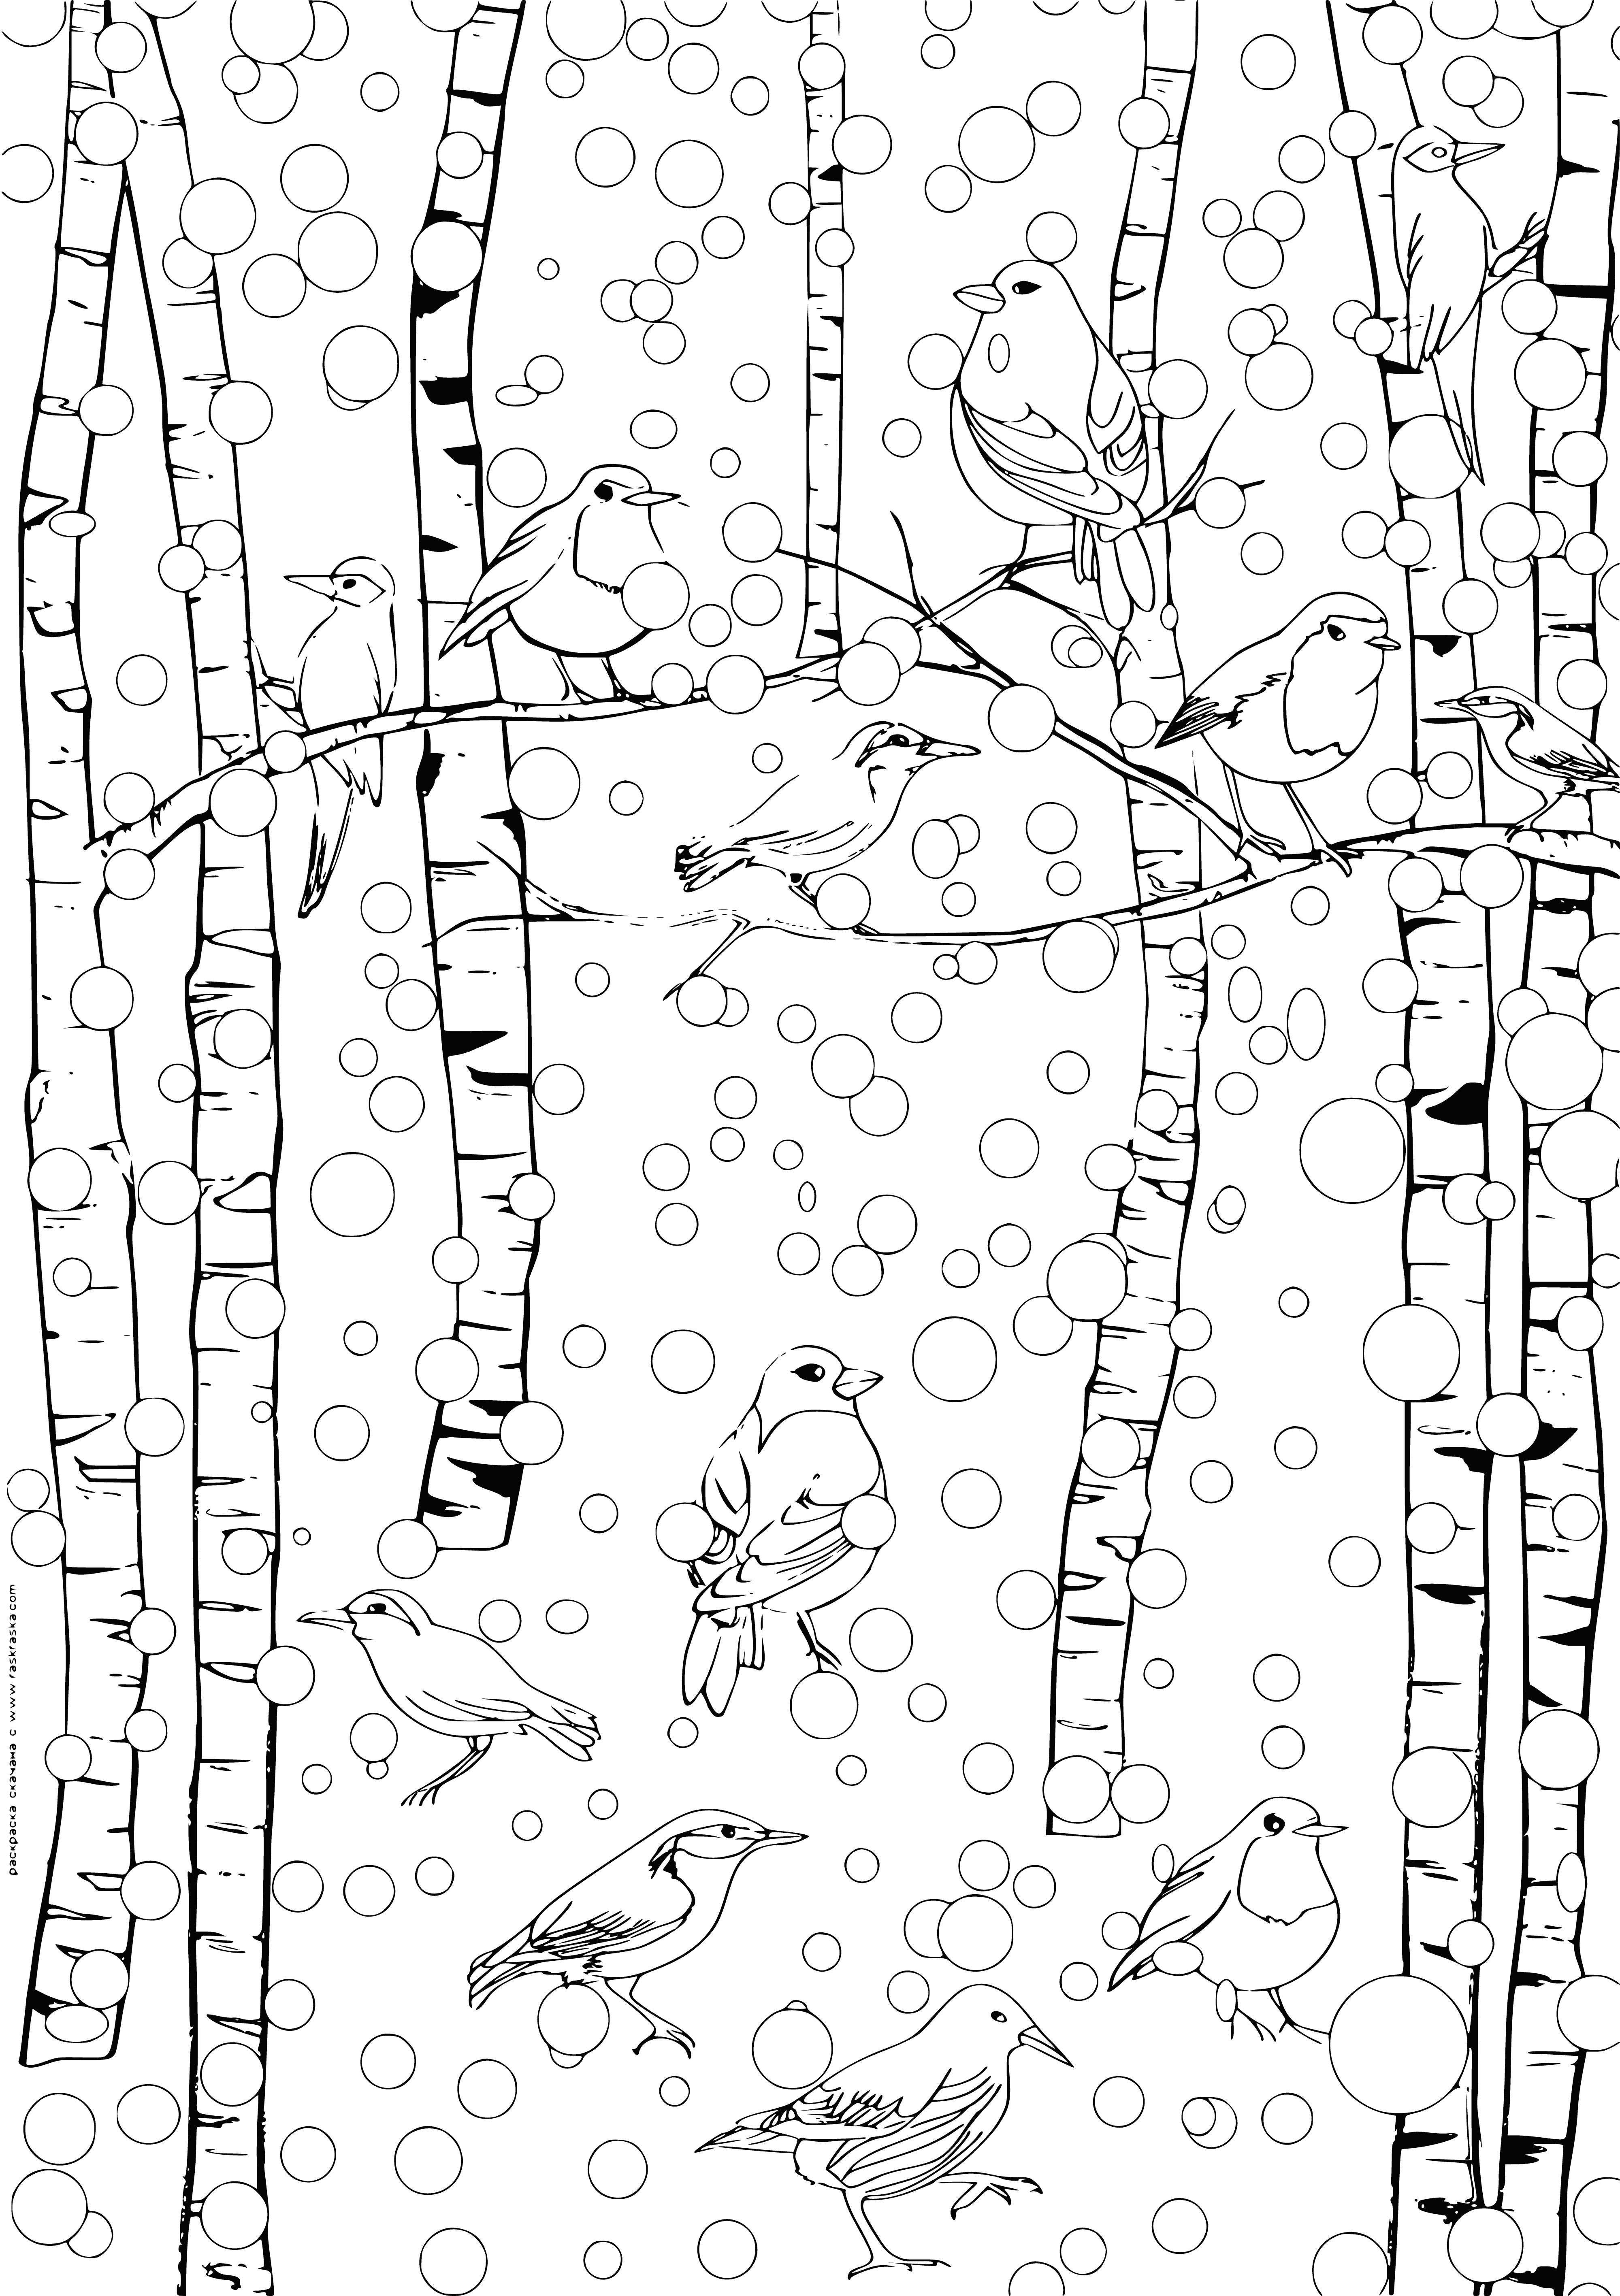 Birds in the winter forest coloring page